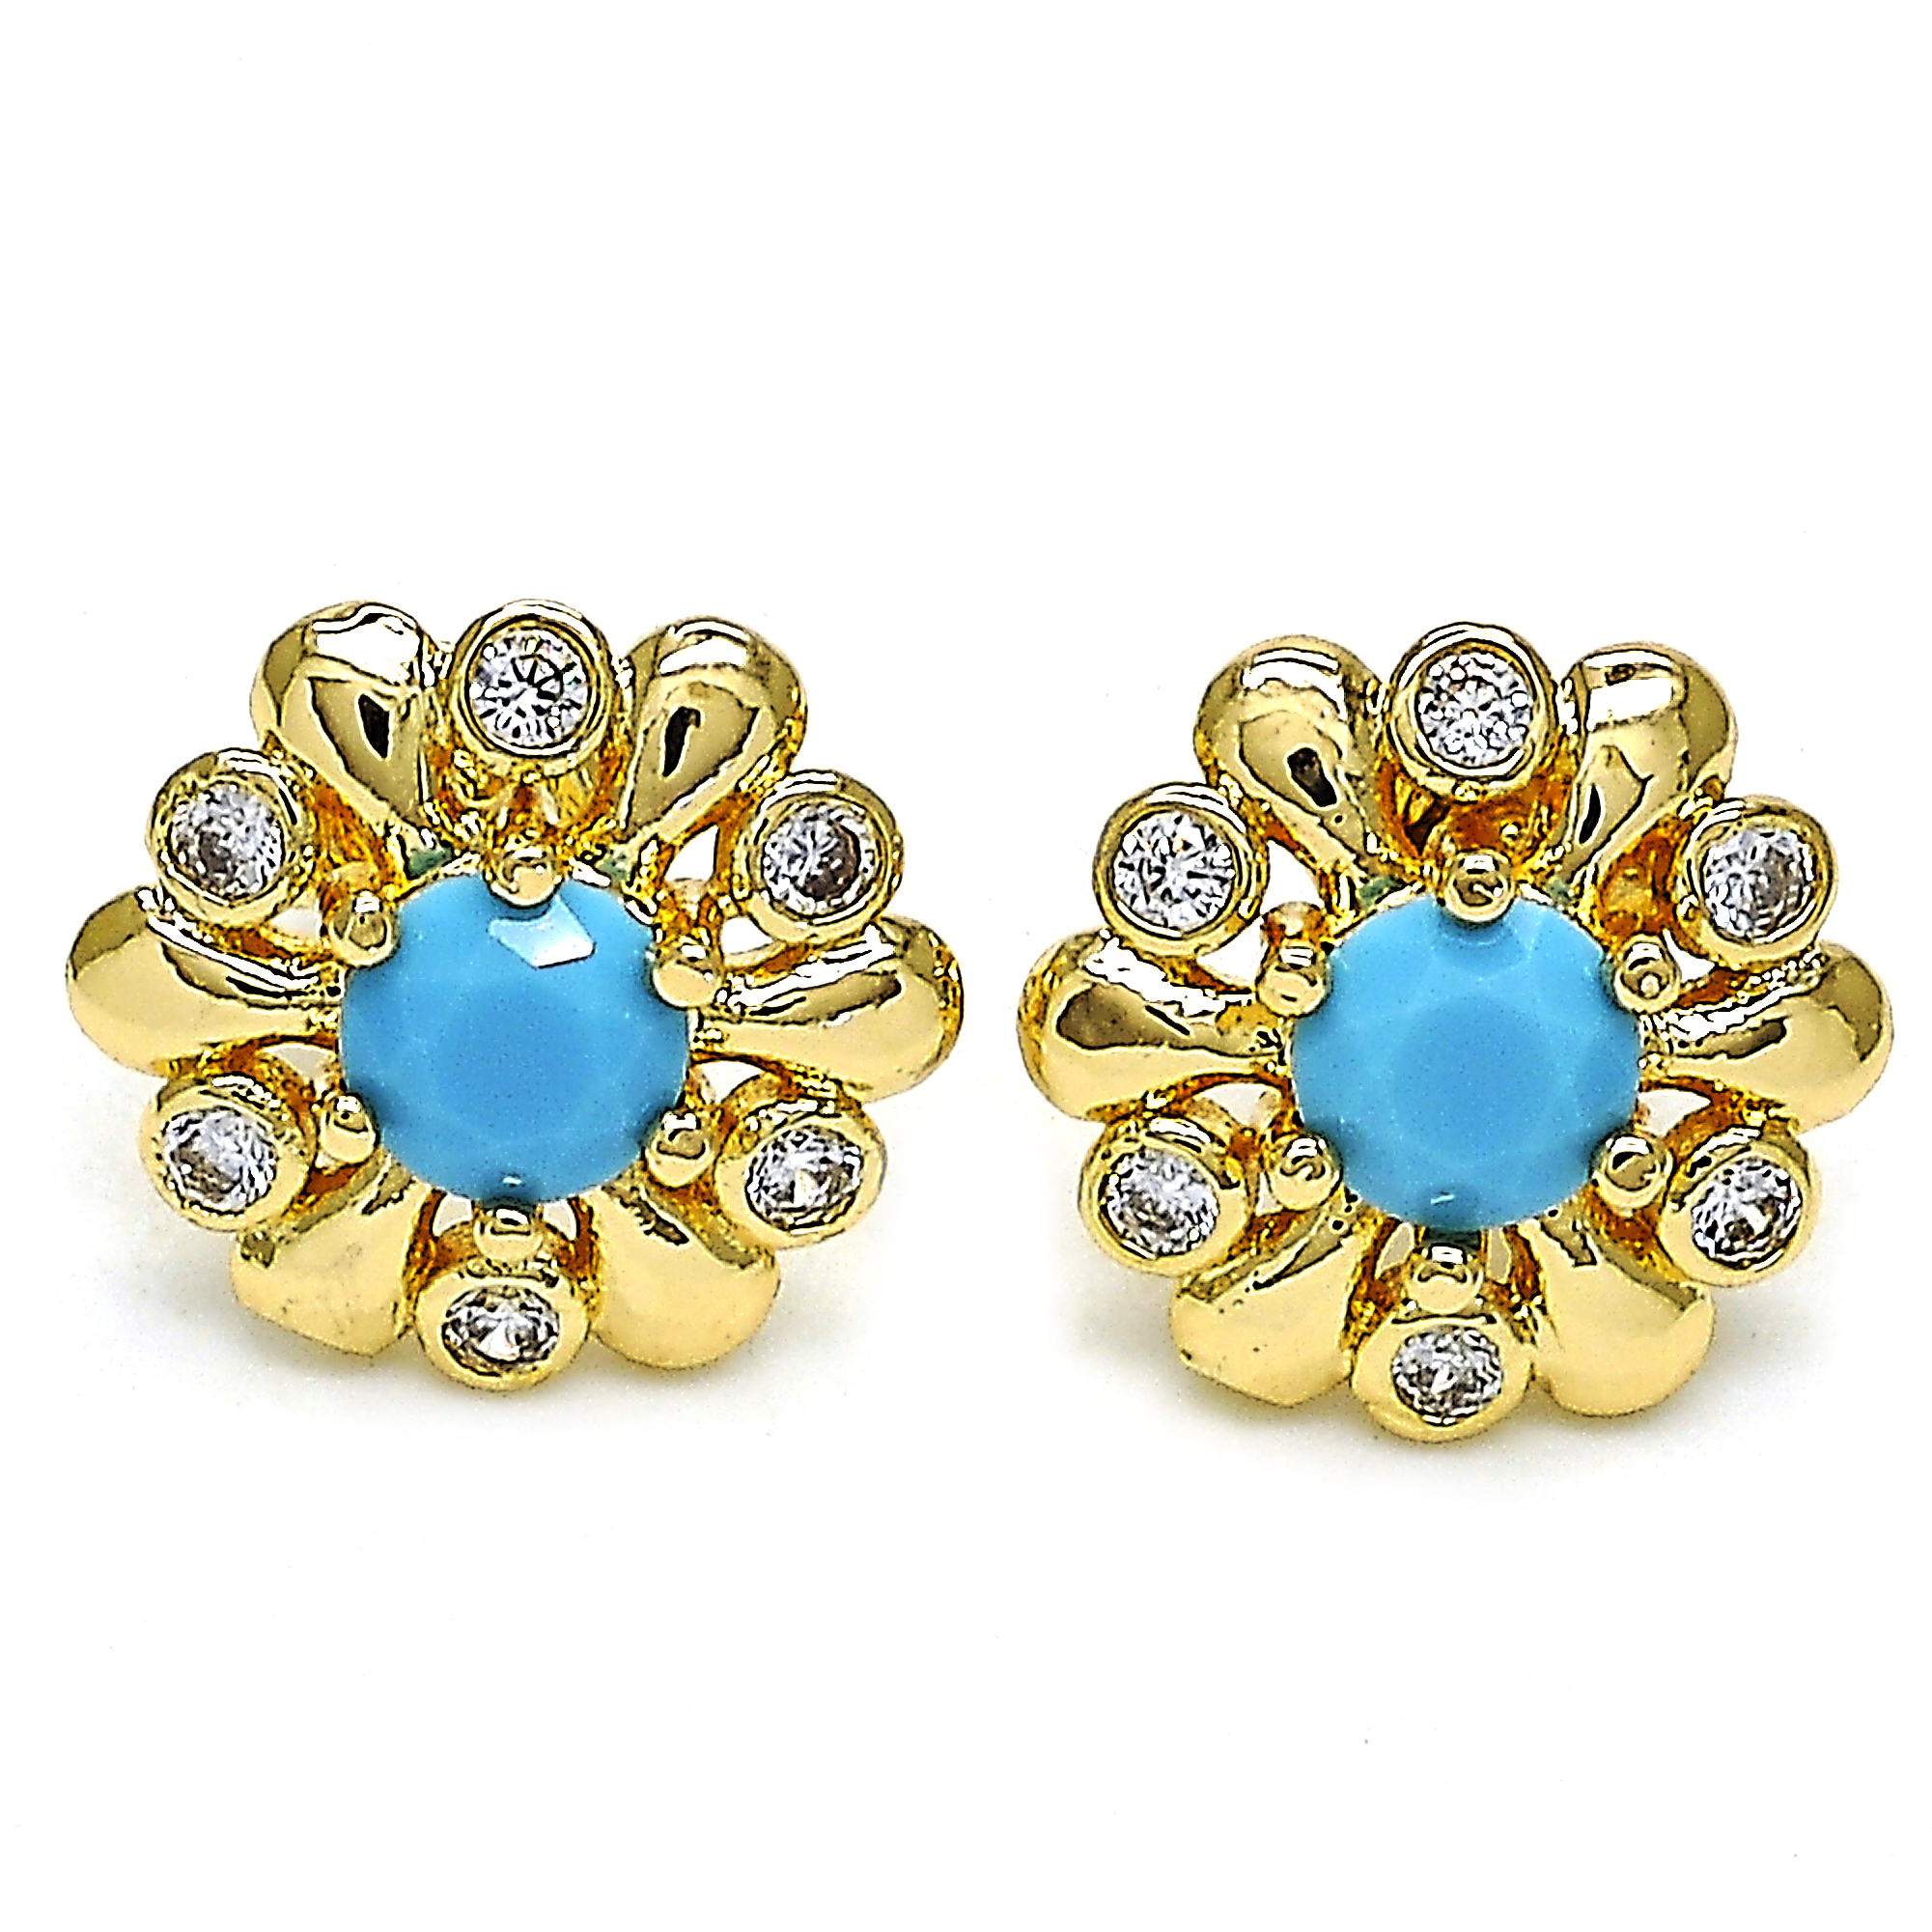 14K Gold Filled High Polish Finsh Stud Earring, Flower Design, With Opal And Cubic Zirconia, Golden Tone